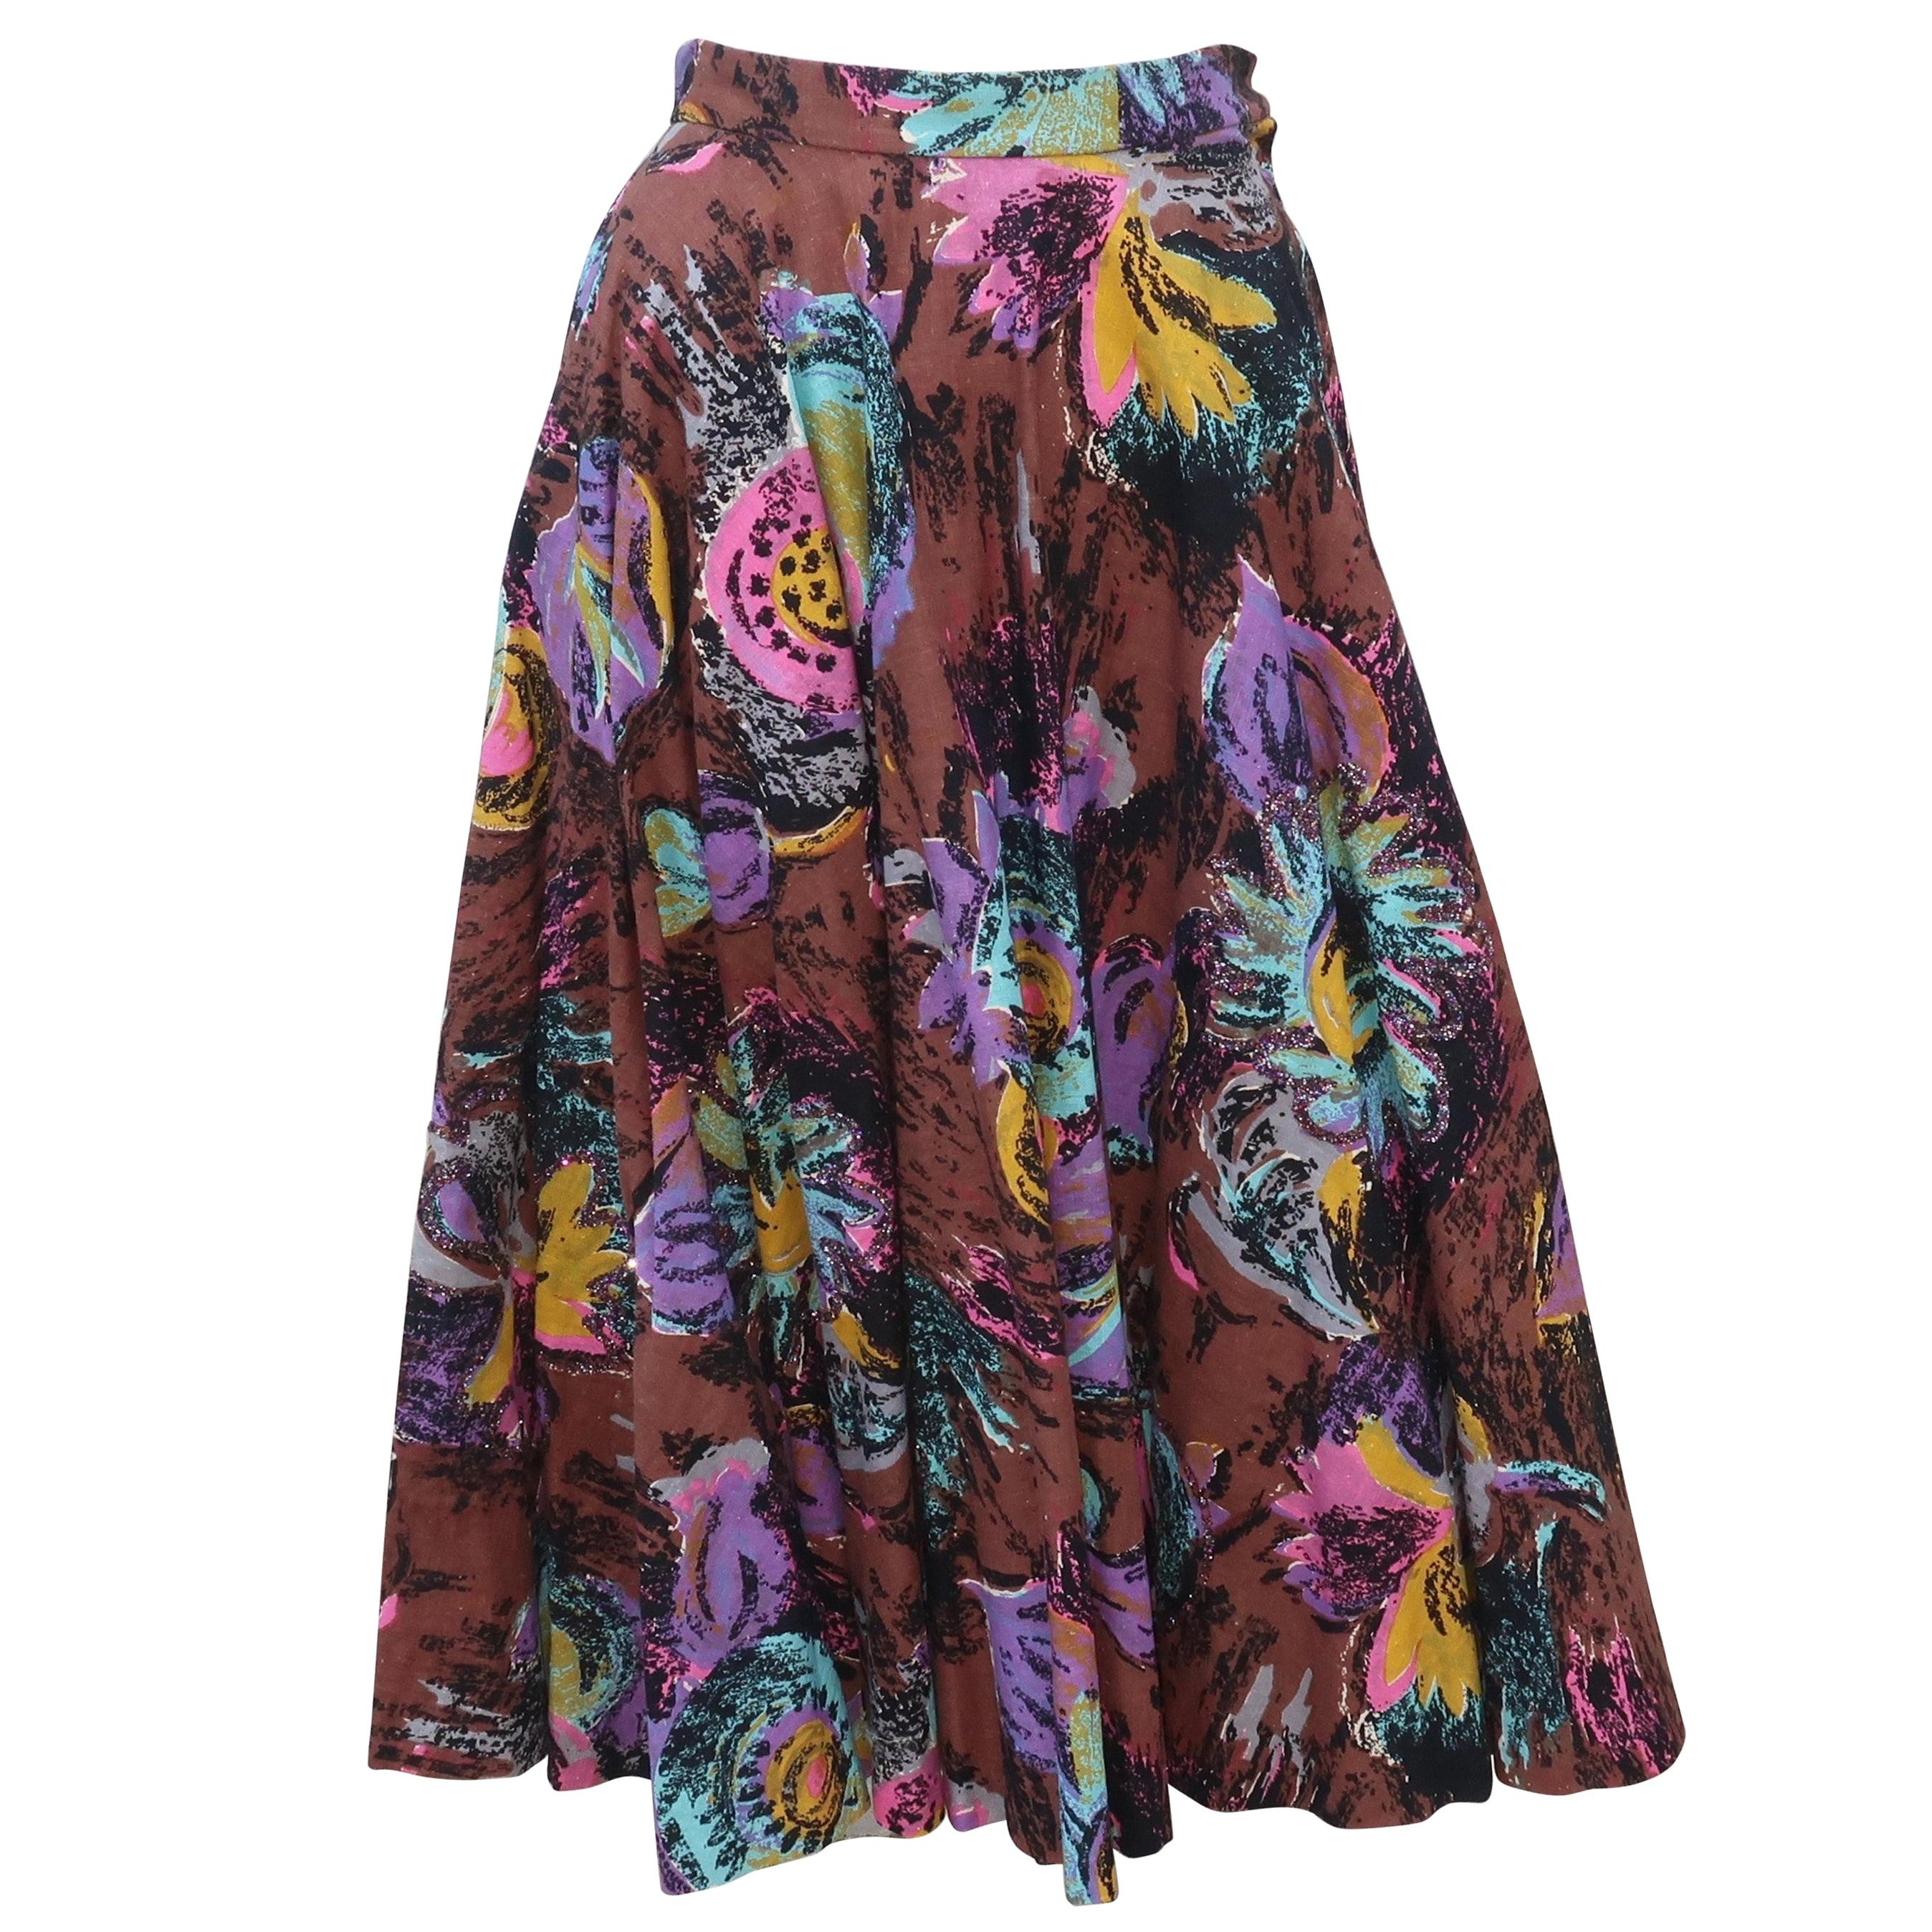 1950's Circle Swing Skirt With Novelty Glitter Floral Print